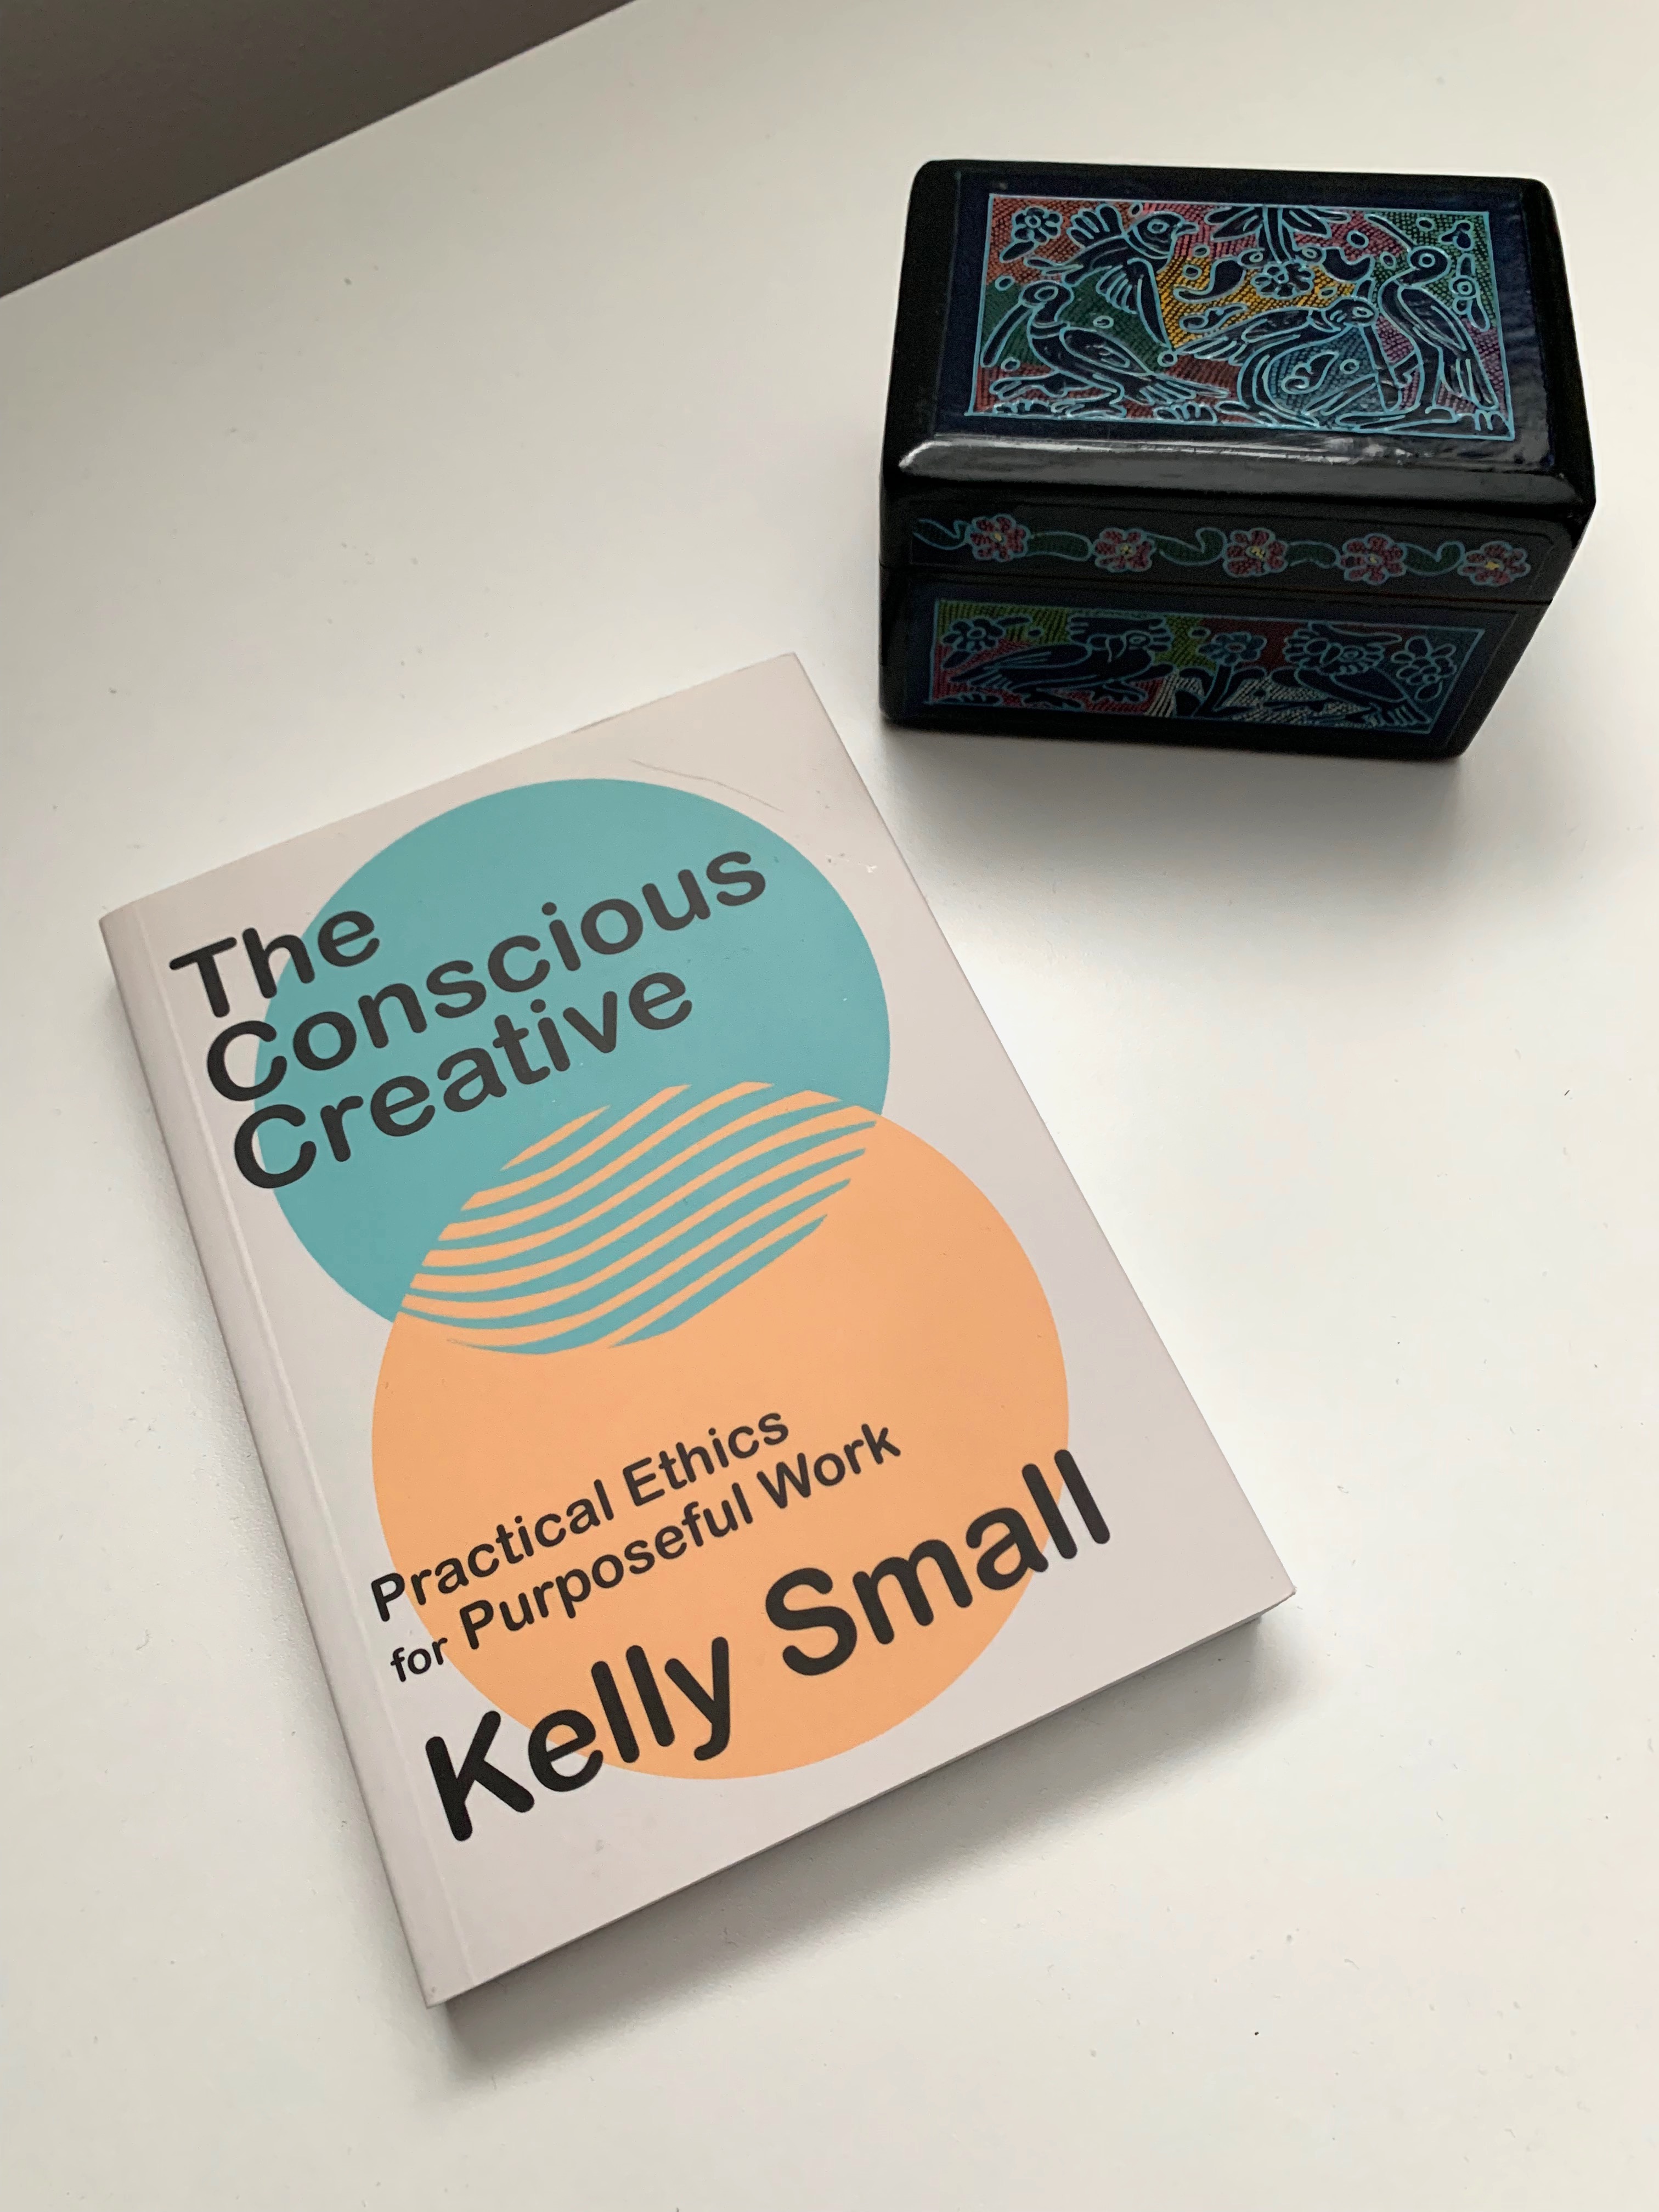 The book "The Conscious Creative" sits on a white desk to the left of a hand made and colourfully painted wood box from Mexico.